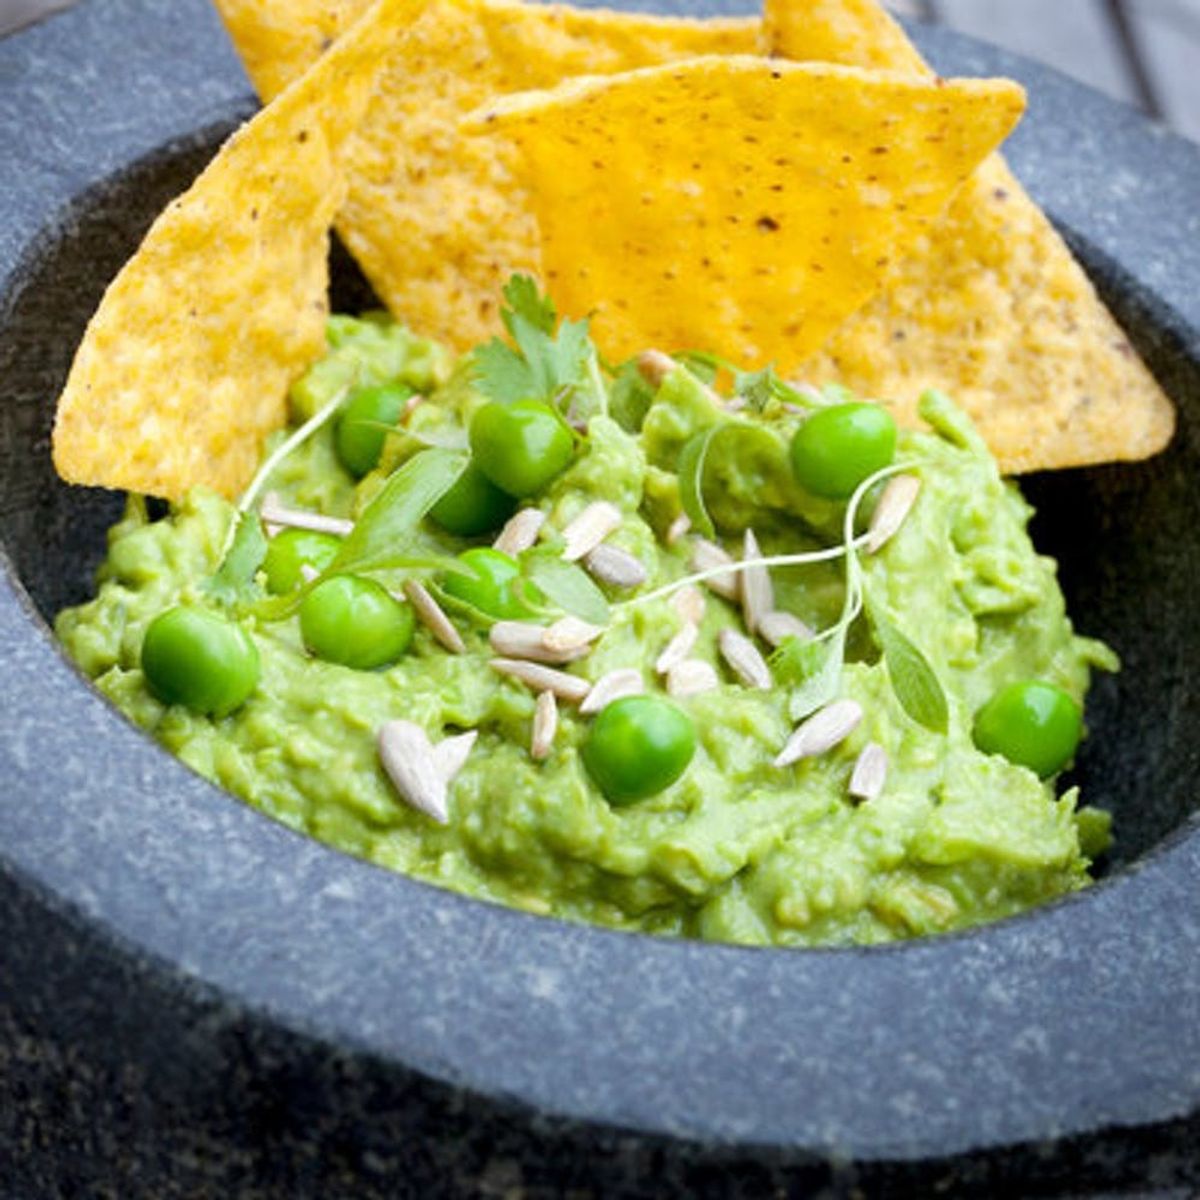 This Just Might Be the Weirdest Thing You Can Put in Guacamole